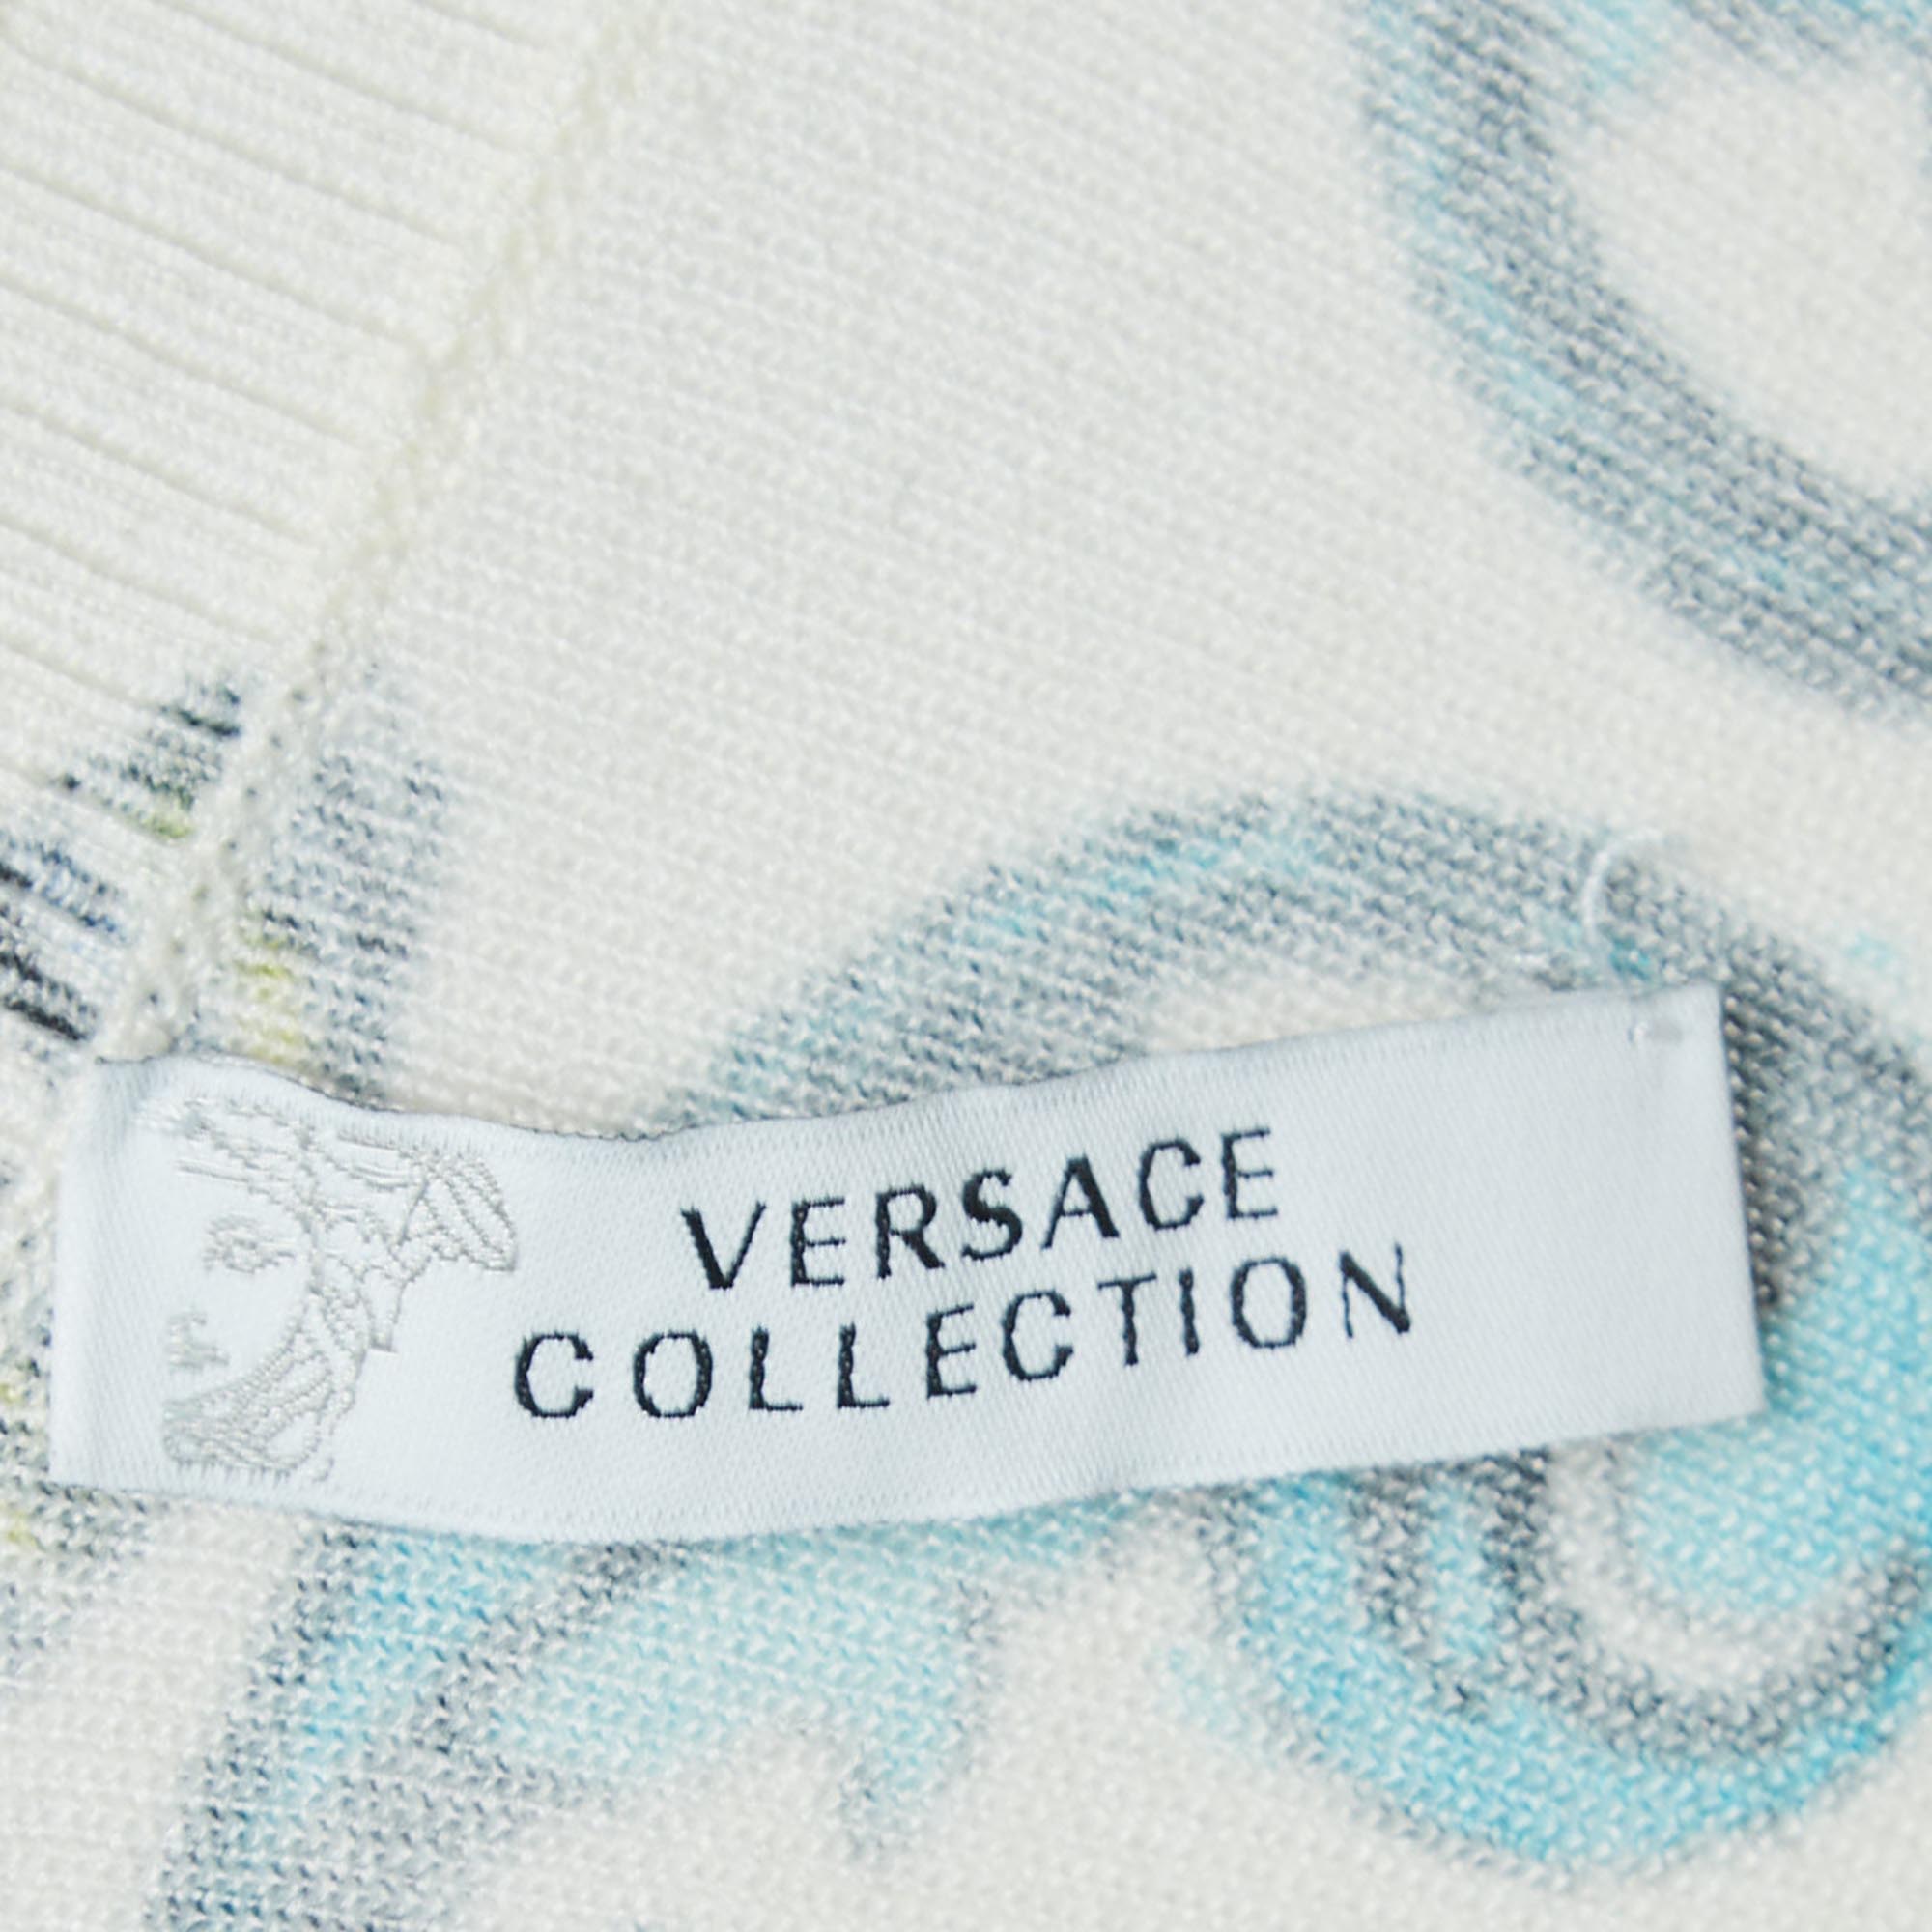 Versace Collection Cream Printed Knit Button Front Top M